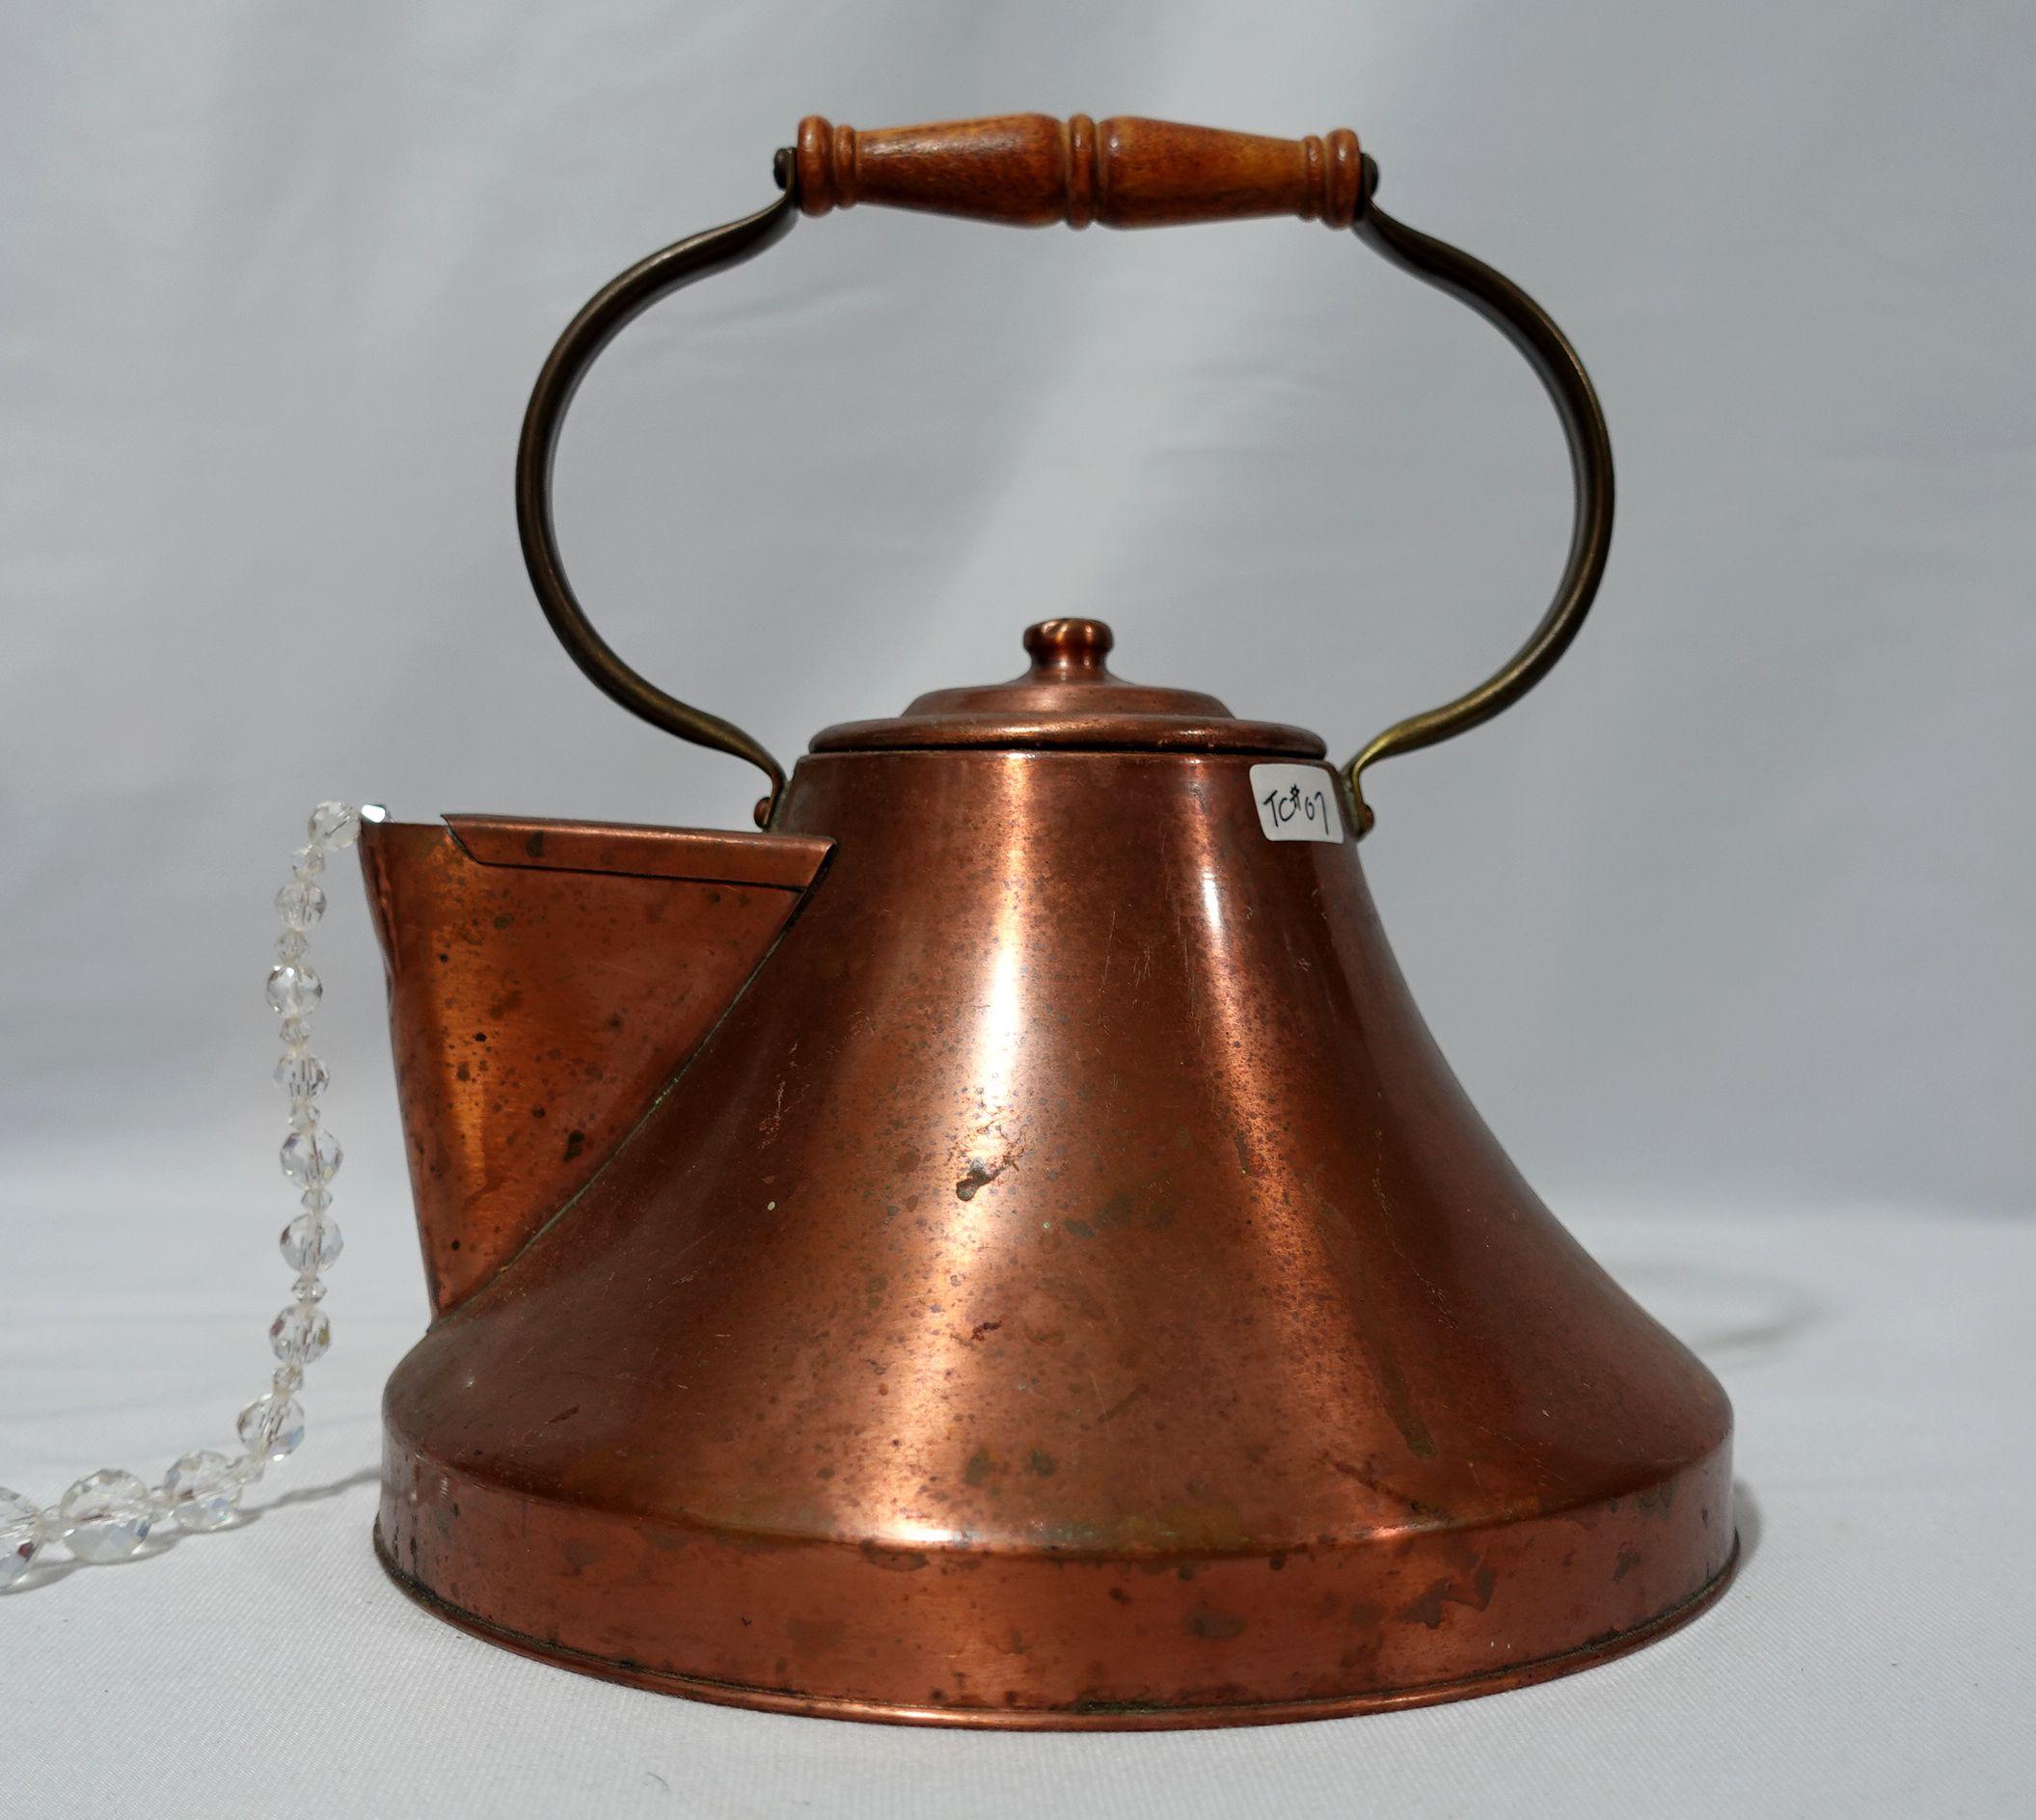 Hand-hammered a ship's copper tea kettle made in England from the 19th century, very well hand-made with delicate craftsmanship, and highly collectible antique.
The purpose of the crystal bids on the spout is to water plants.
